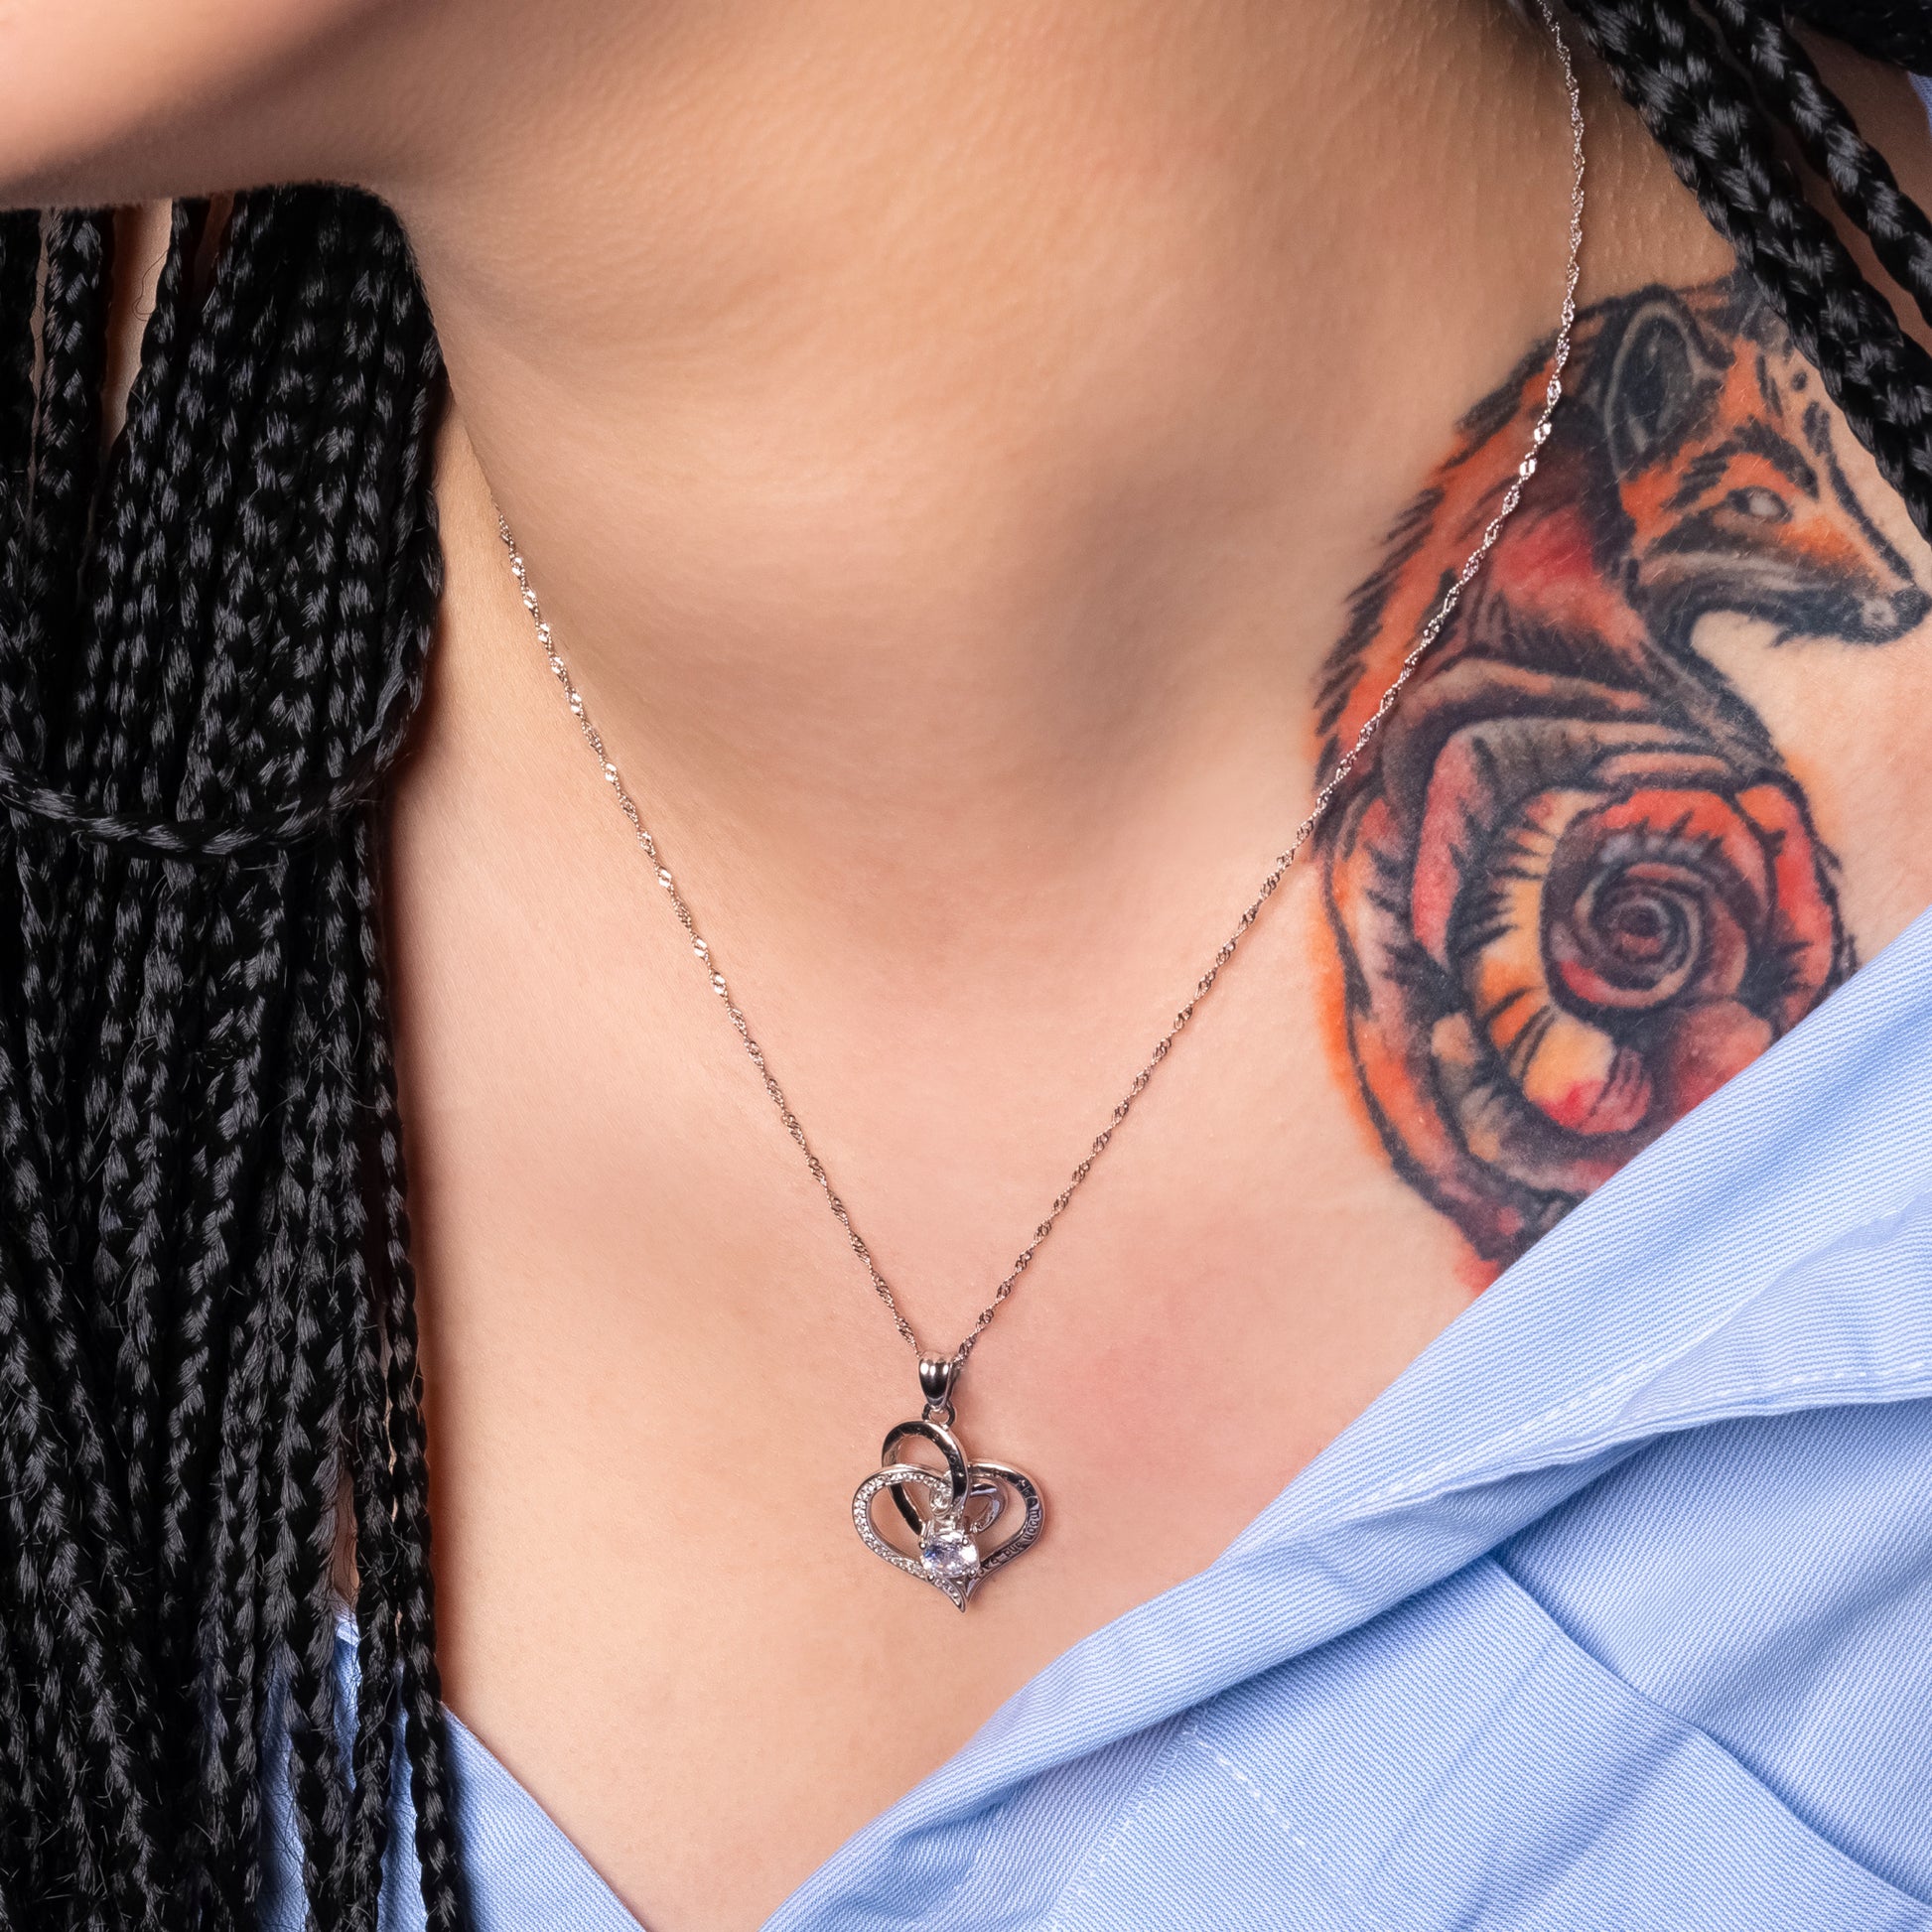 Tatooed Model wearing Twin Love Heart Engraved Pendant paired with Water Wave necklace